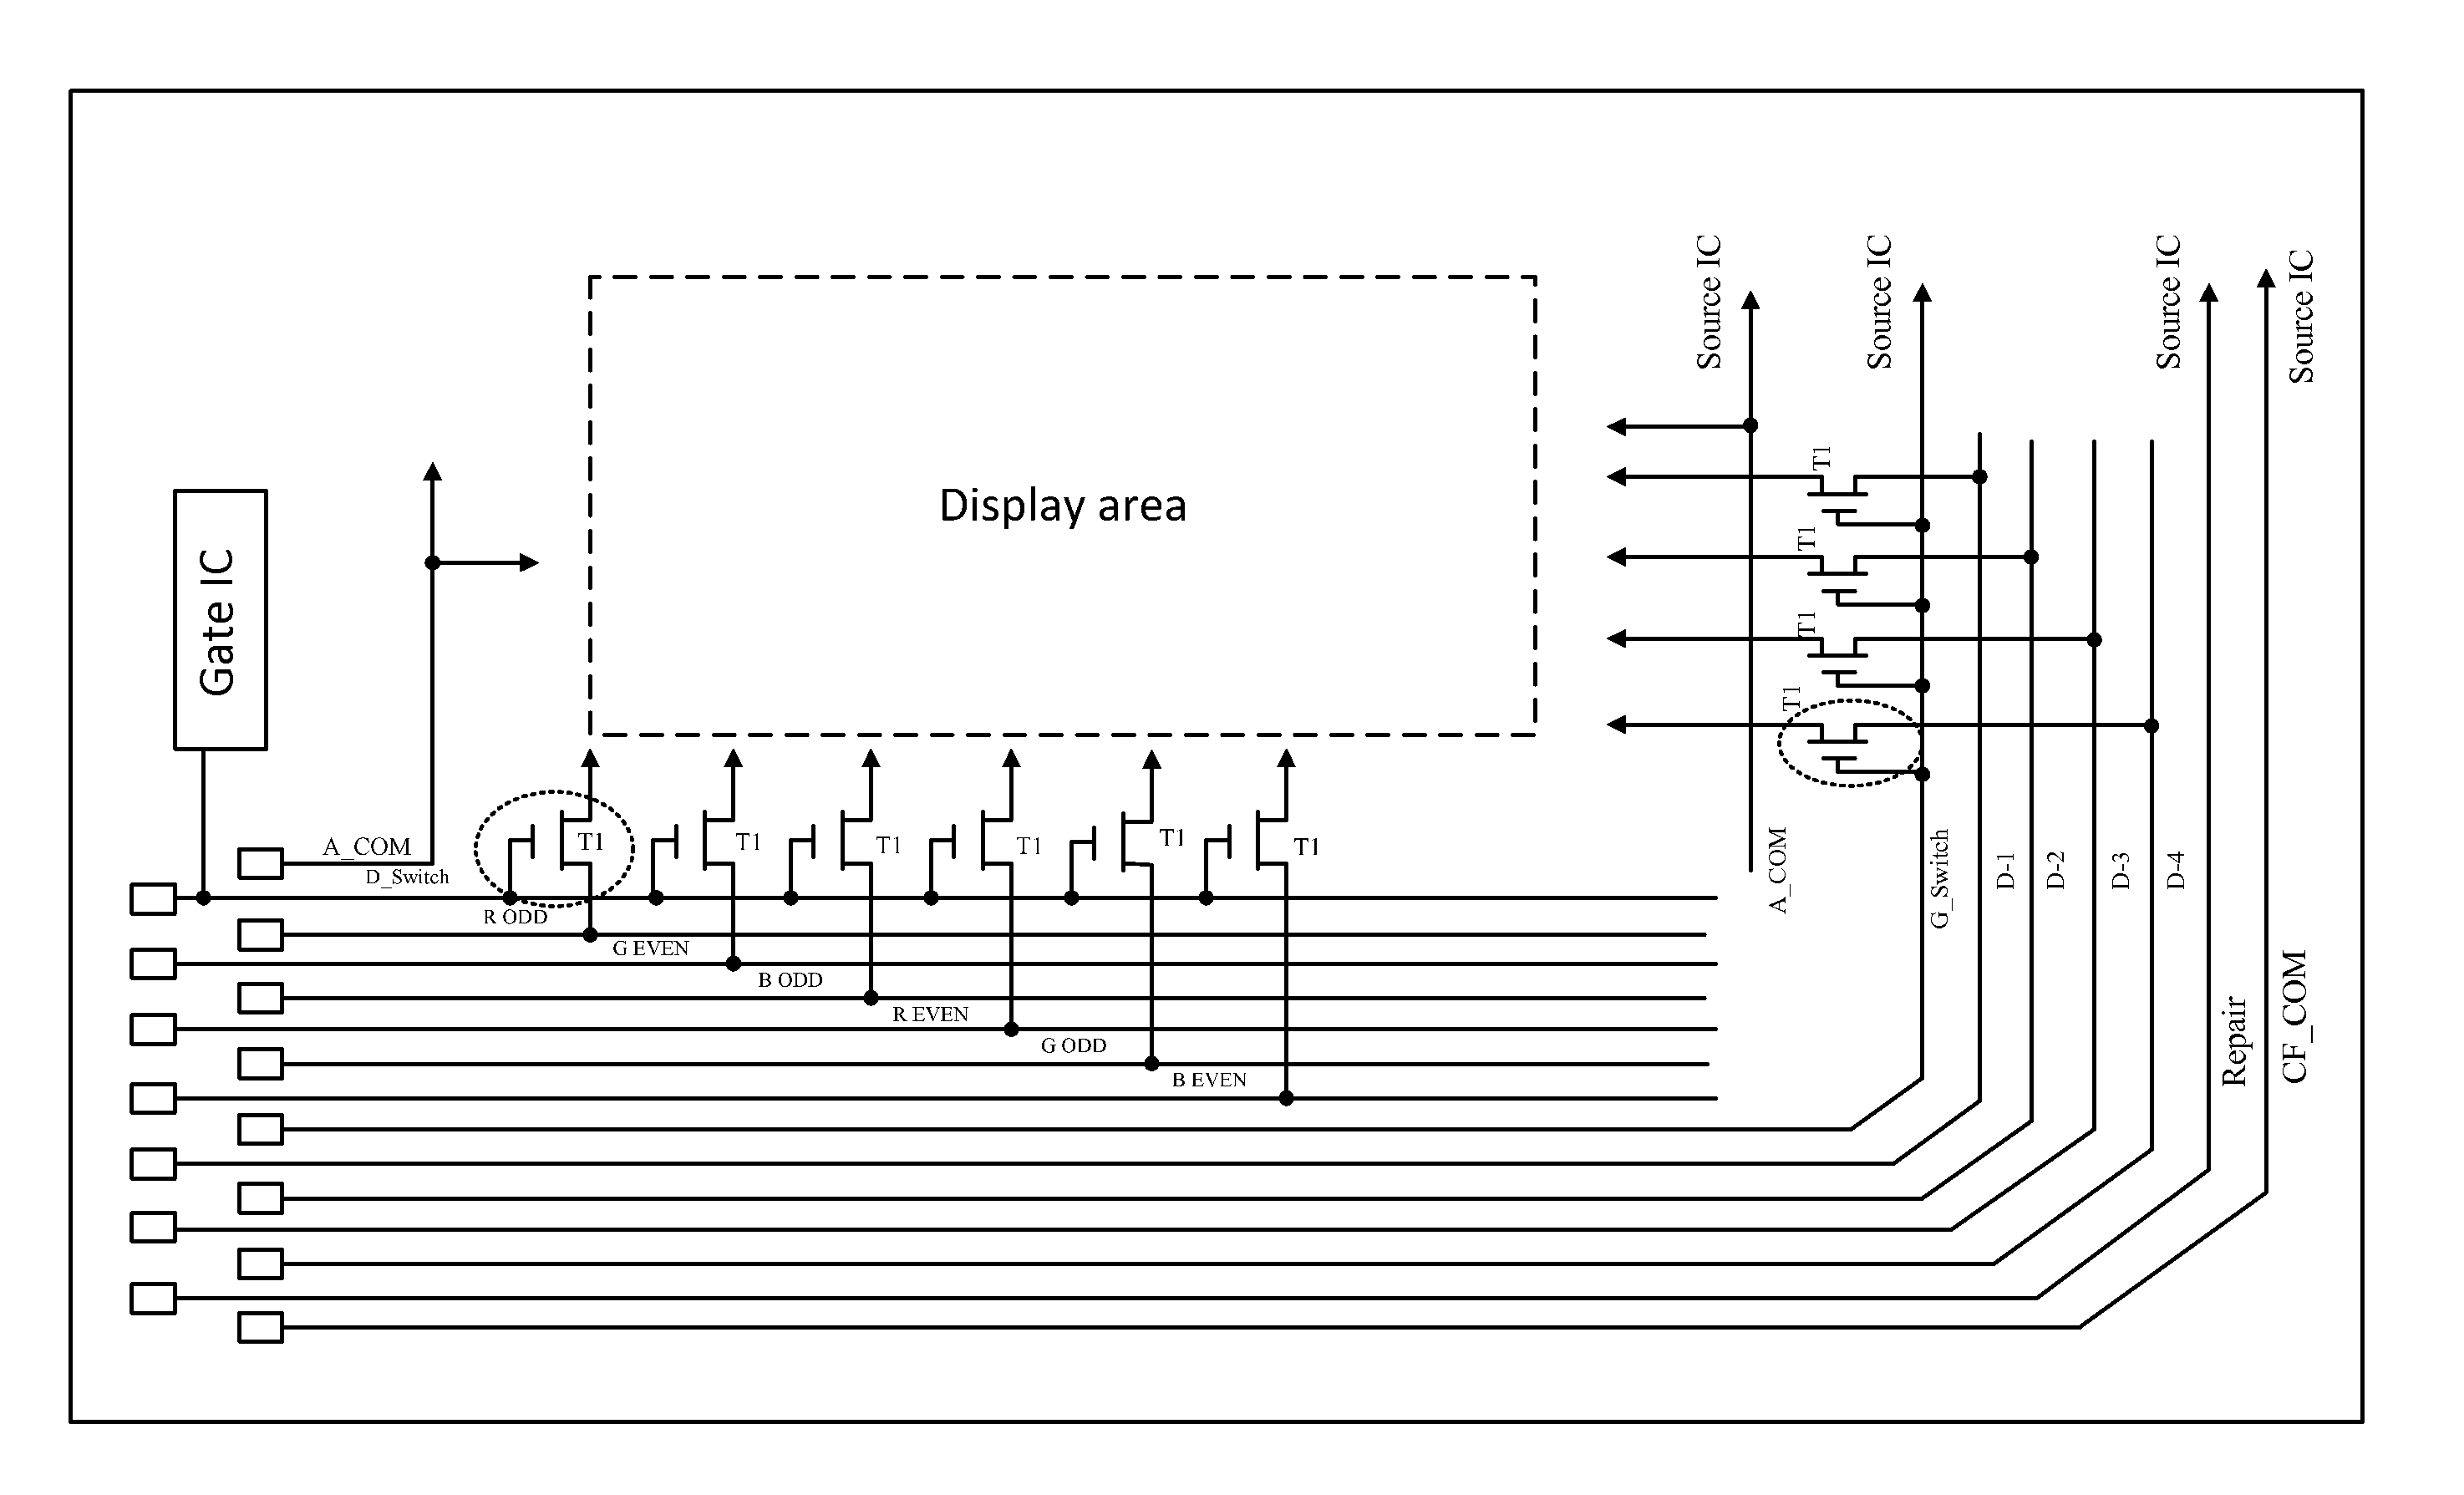 Fast testing switch device and the corresponding tft-lcd array substrate